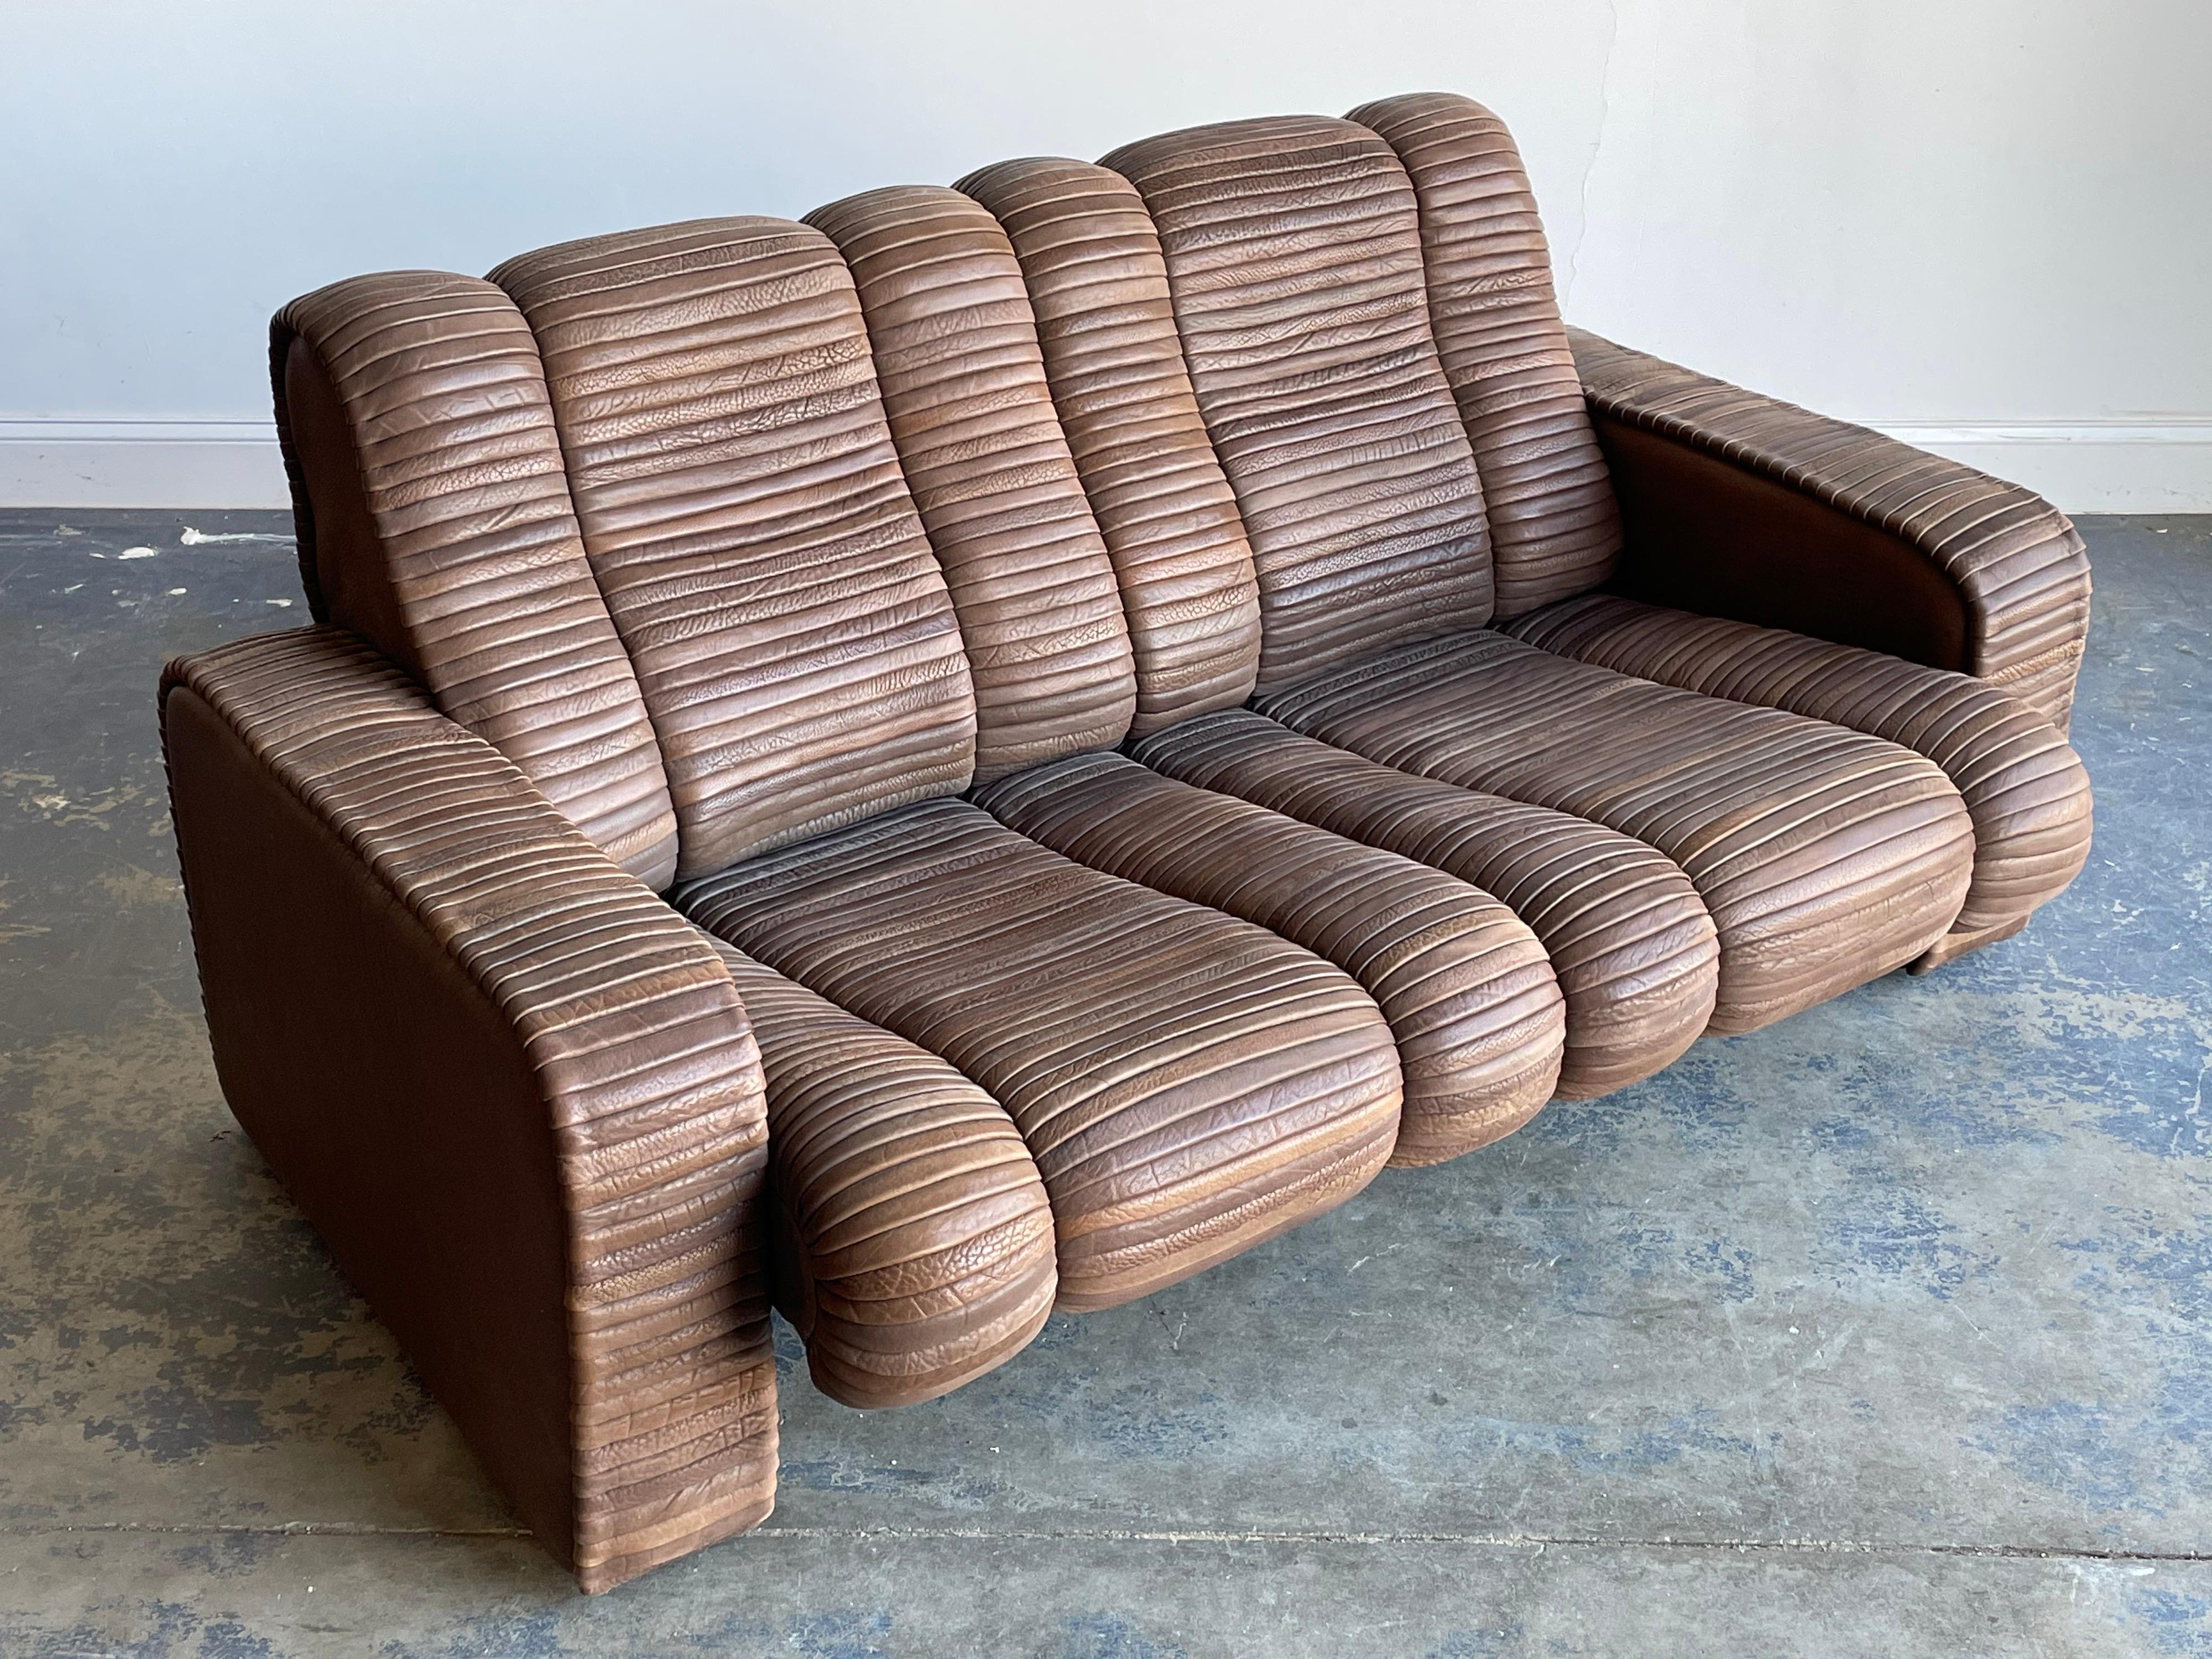 An unusual leather sofa designed by Ernst Lüthy between 1962-1964, who went on to form De Sede in 1965. 

Sofa consists of thick leather strips throughout creating an interesting and organic design. Sofa is incredibly well built, as De Sede has